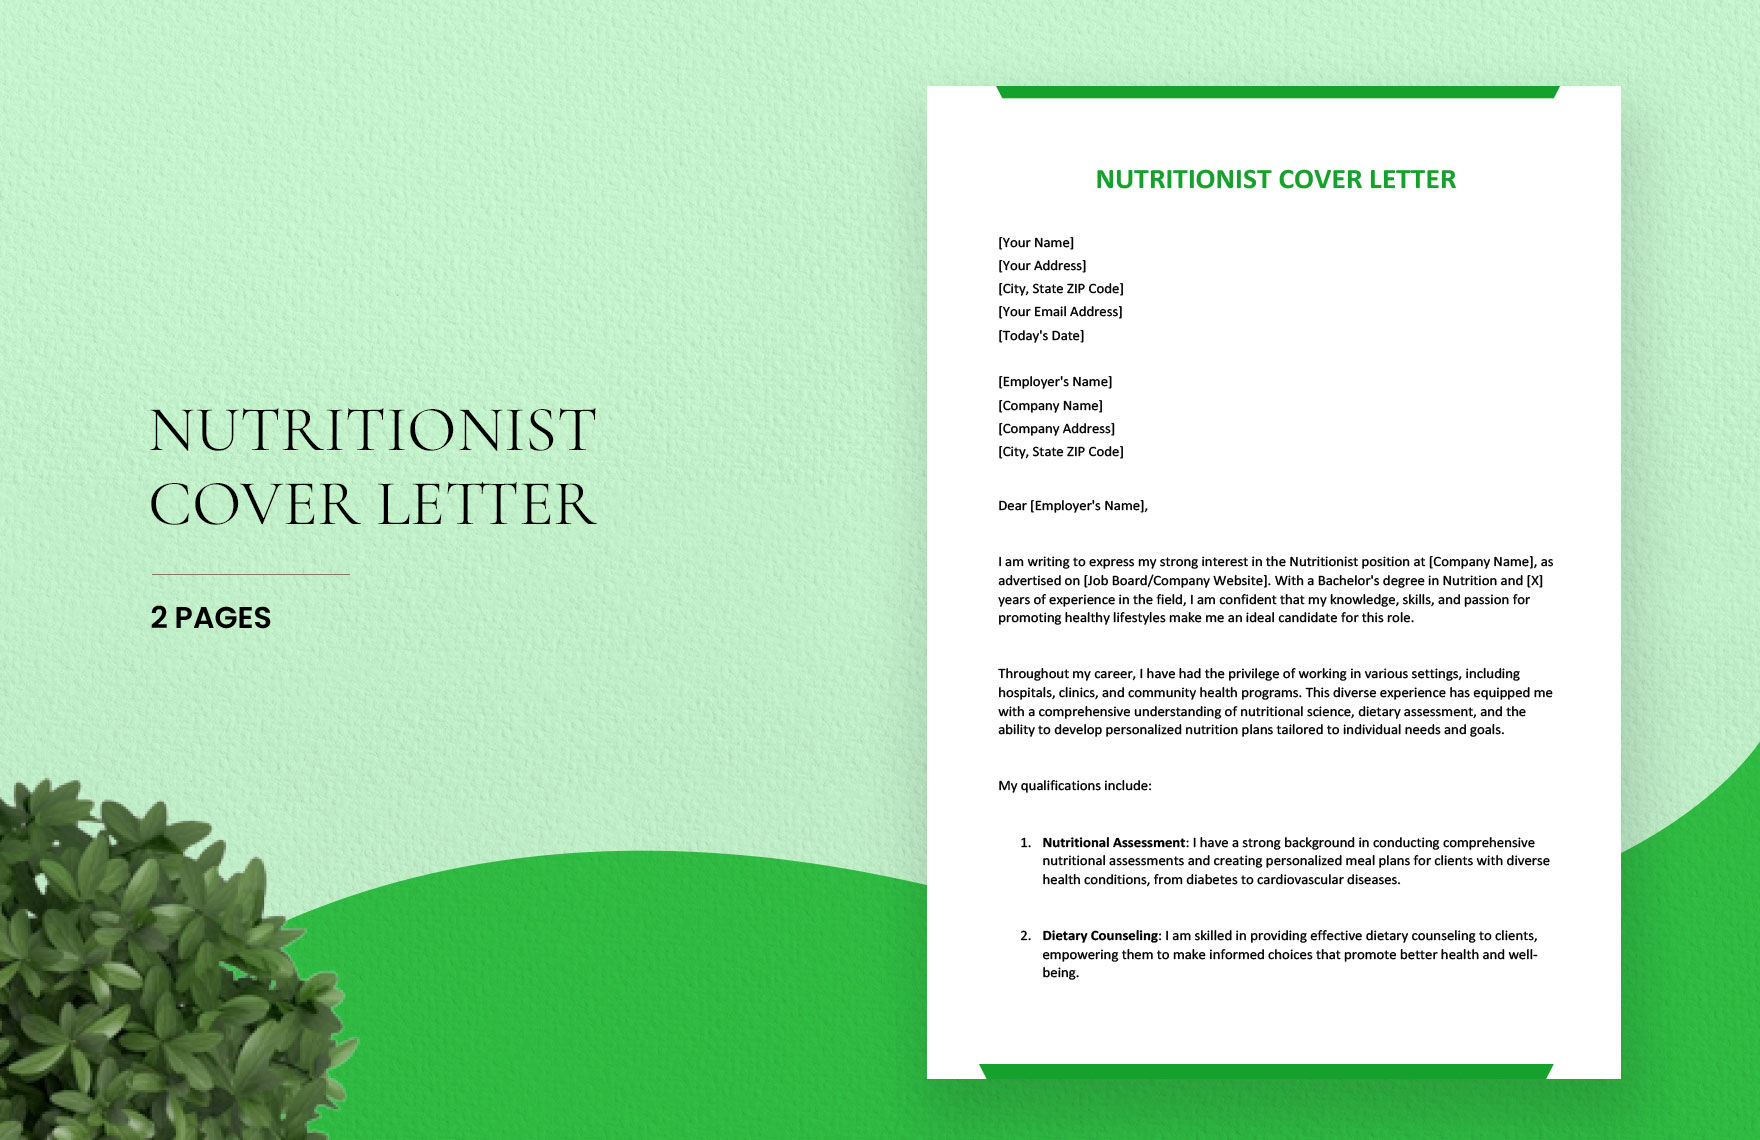 Nutritionist Cover Letter in Word, Google Docs